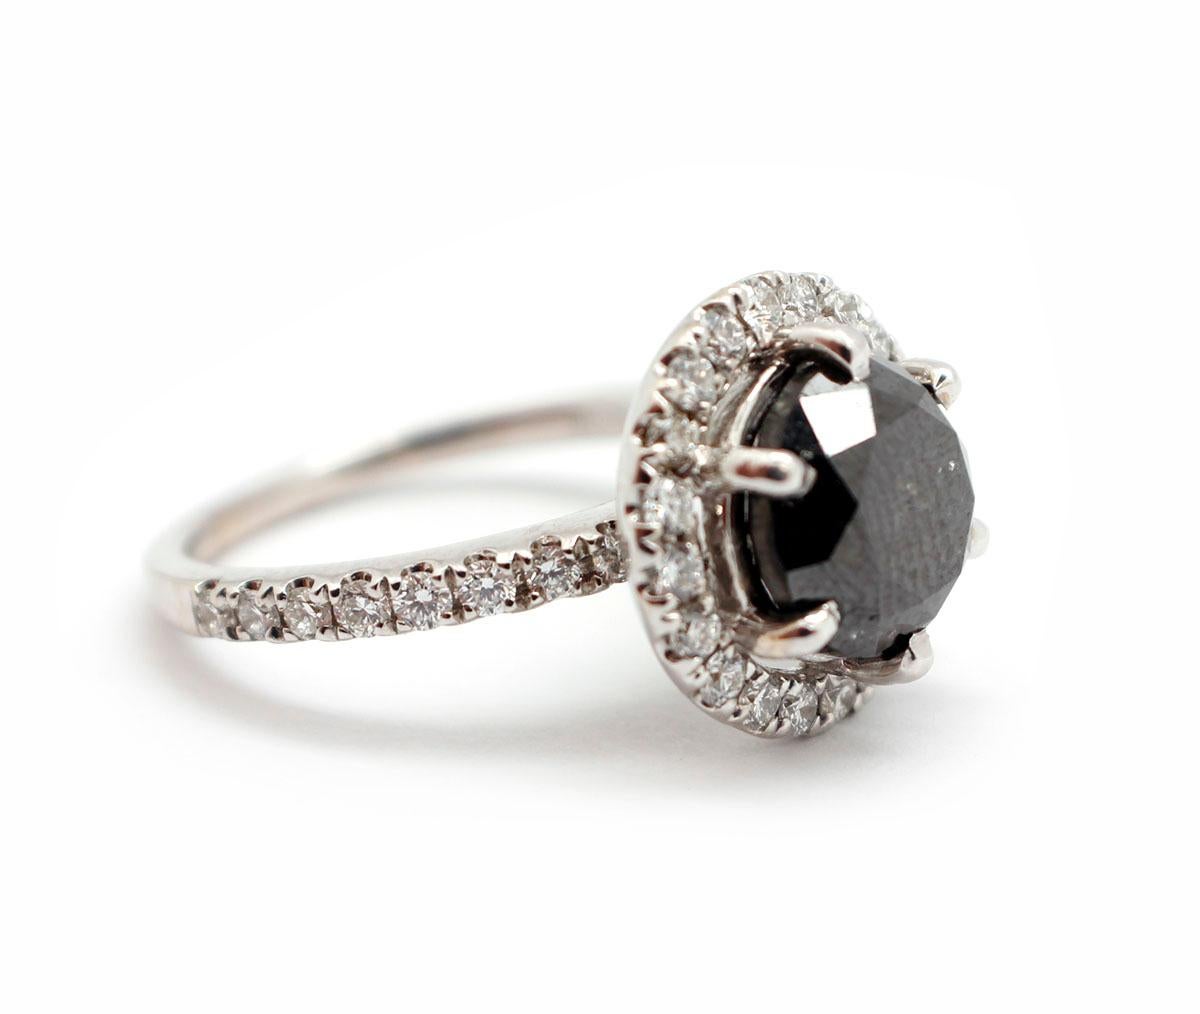 This ring is made in 18k white gold, and it holds a 3.45-carat, round brilliant-cut black diamond at its center. The black diamond is accompanied by a GIA/JGL report, #20181. The ring features a white diamond halo and white diamond accents down the